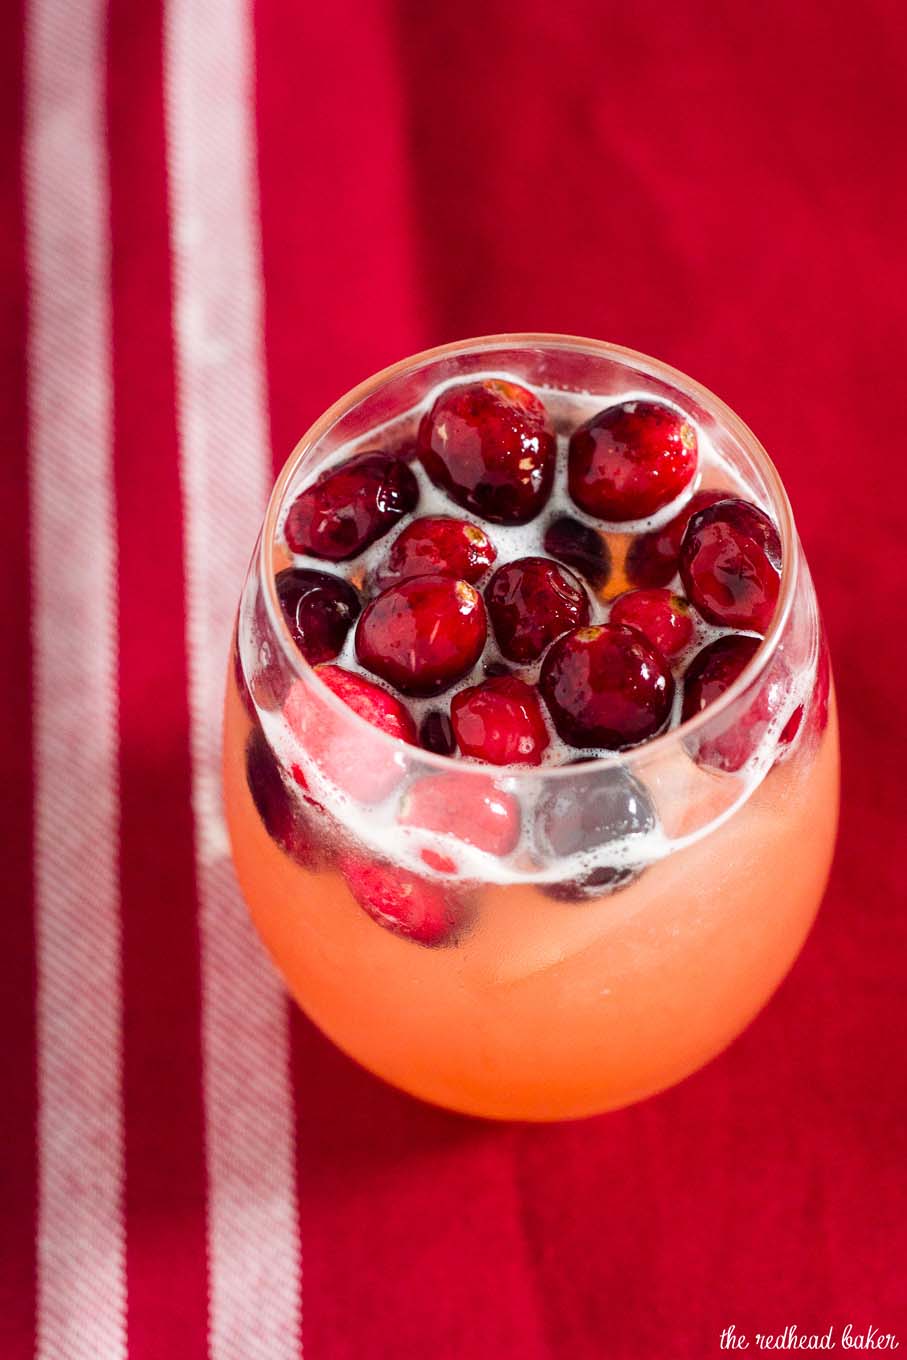 Cranberry cinnamon whiskey sour is an easy, festive cocktail for the Christmas season. Shake up a batch for your holiday party!